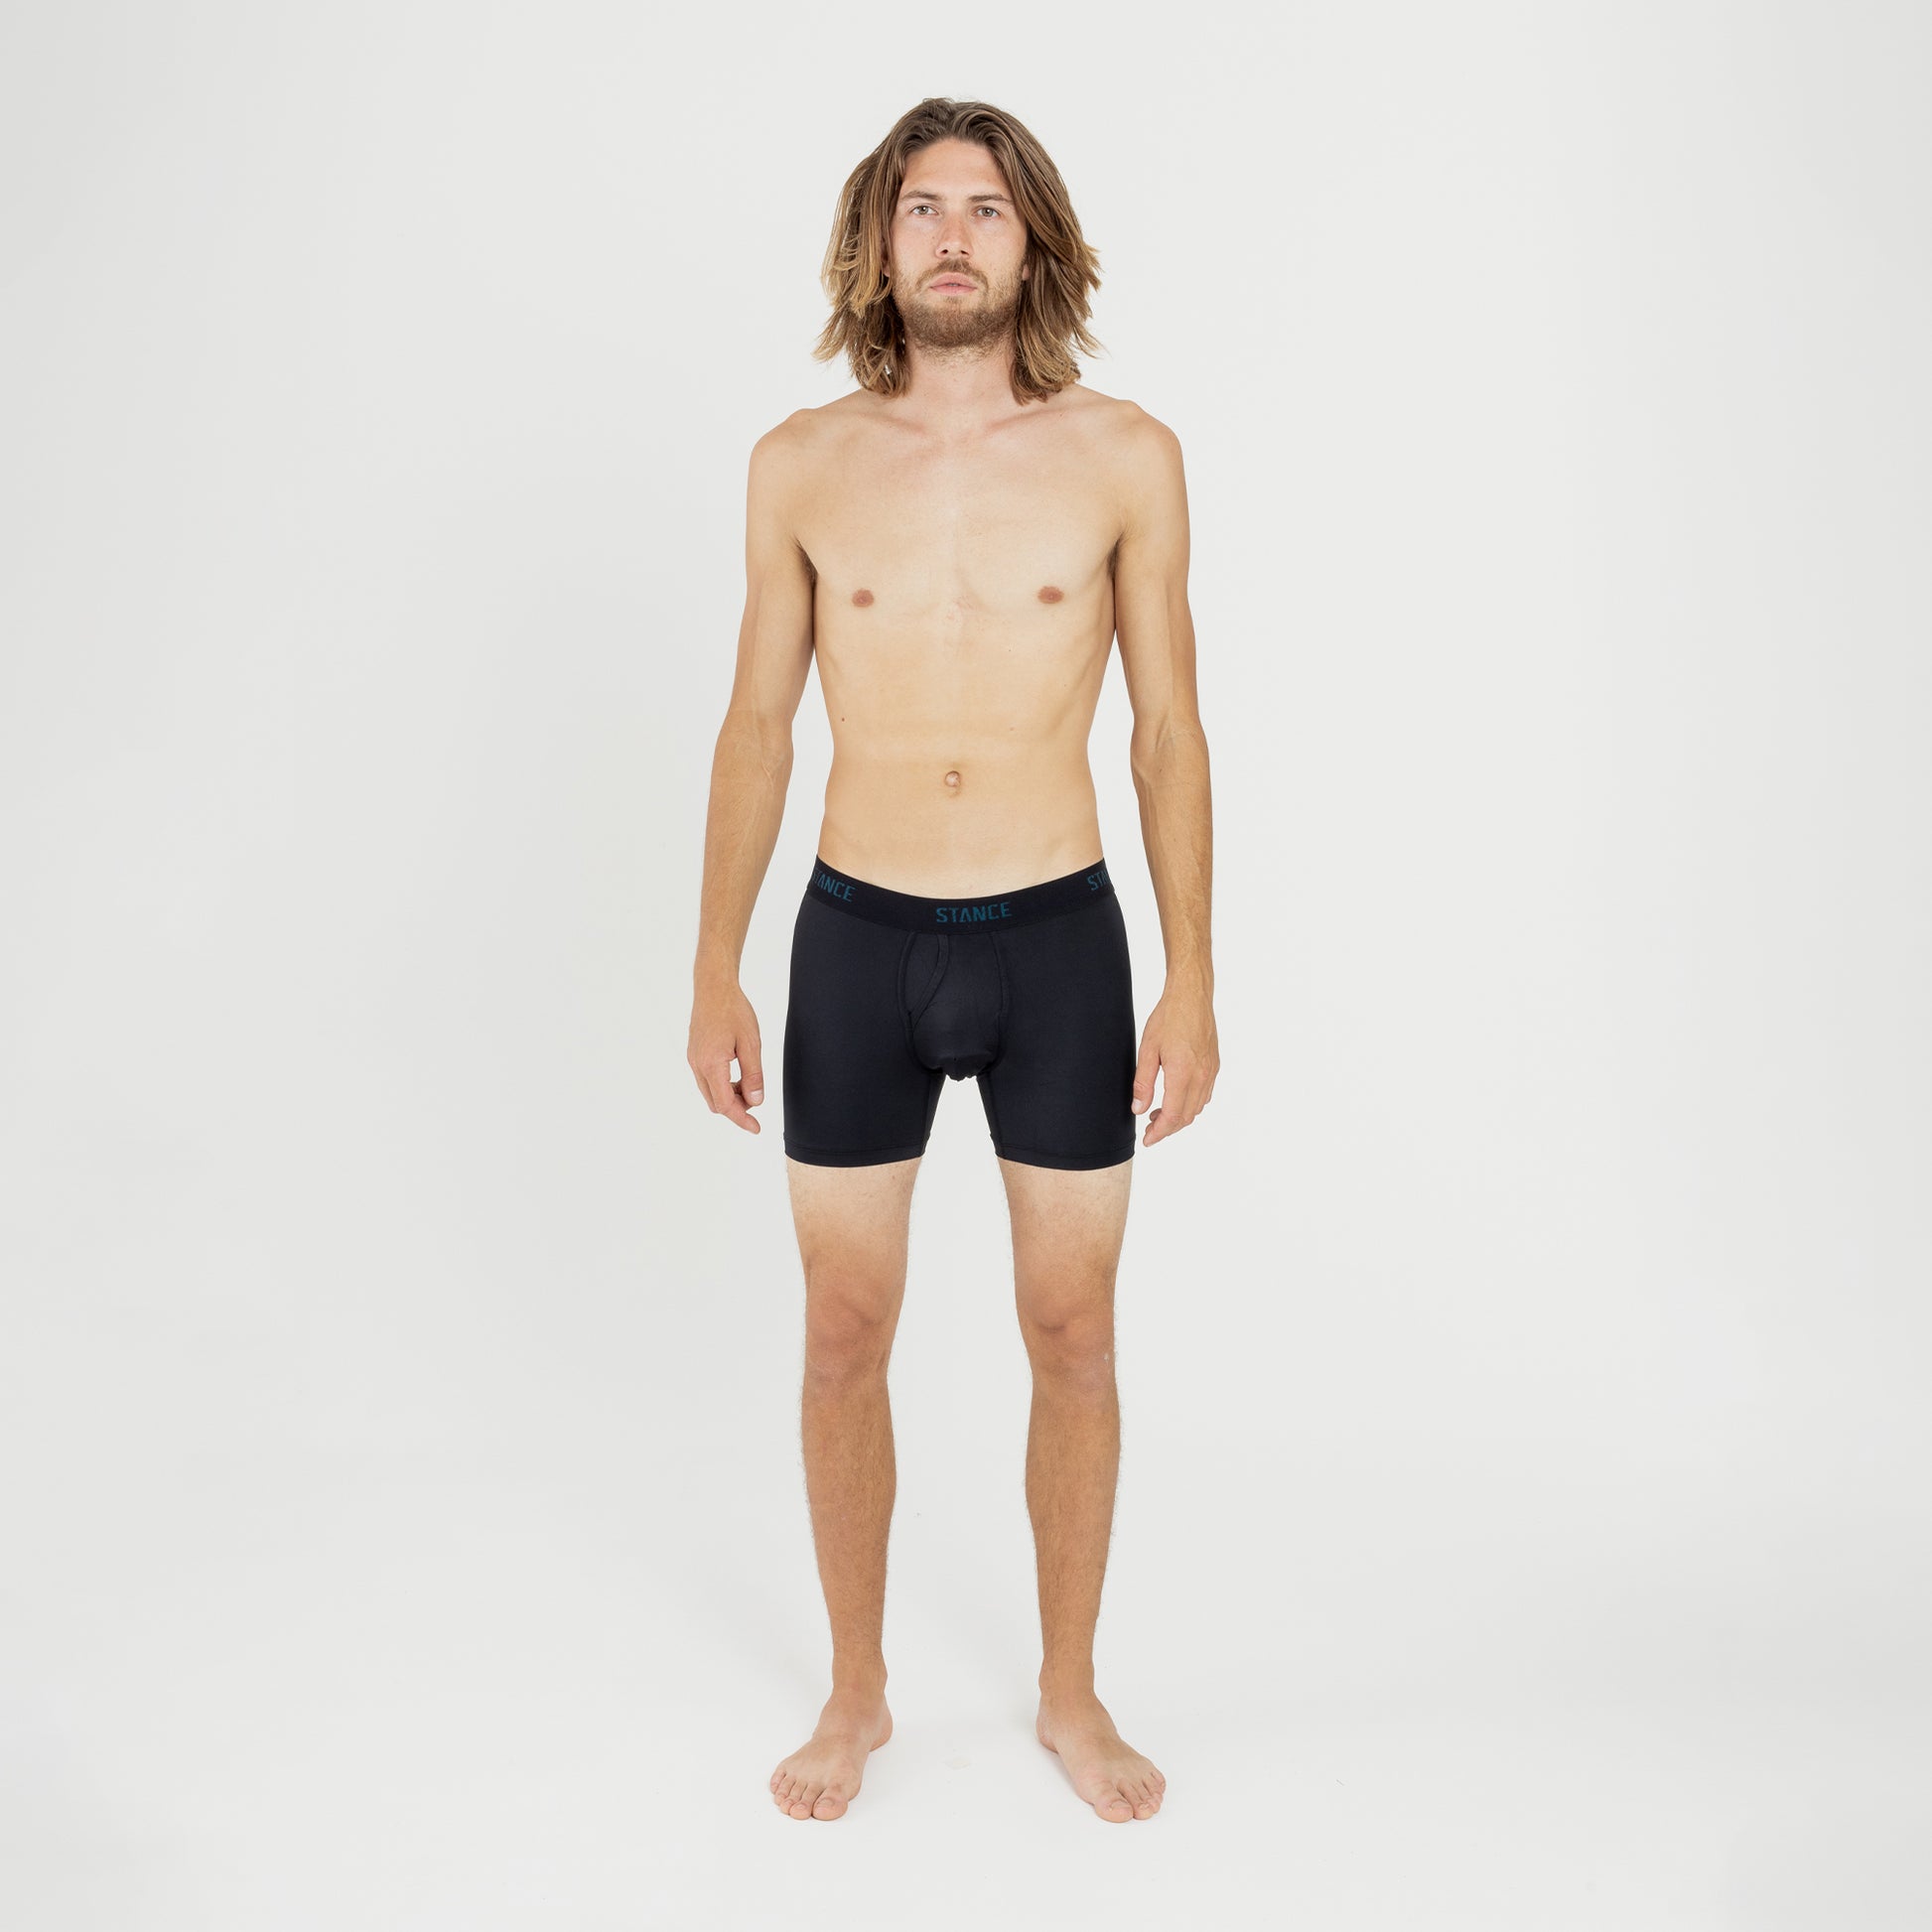 Stance Skelly Nelly Wholester Boxer Brief - Men's 